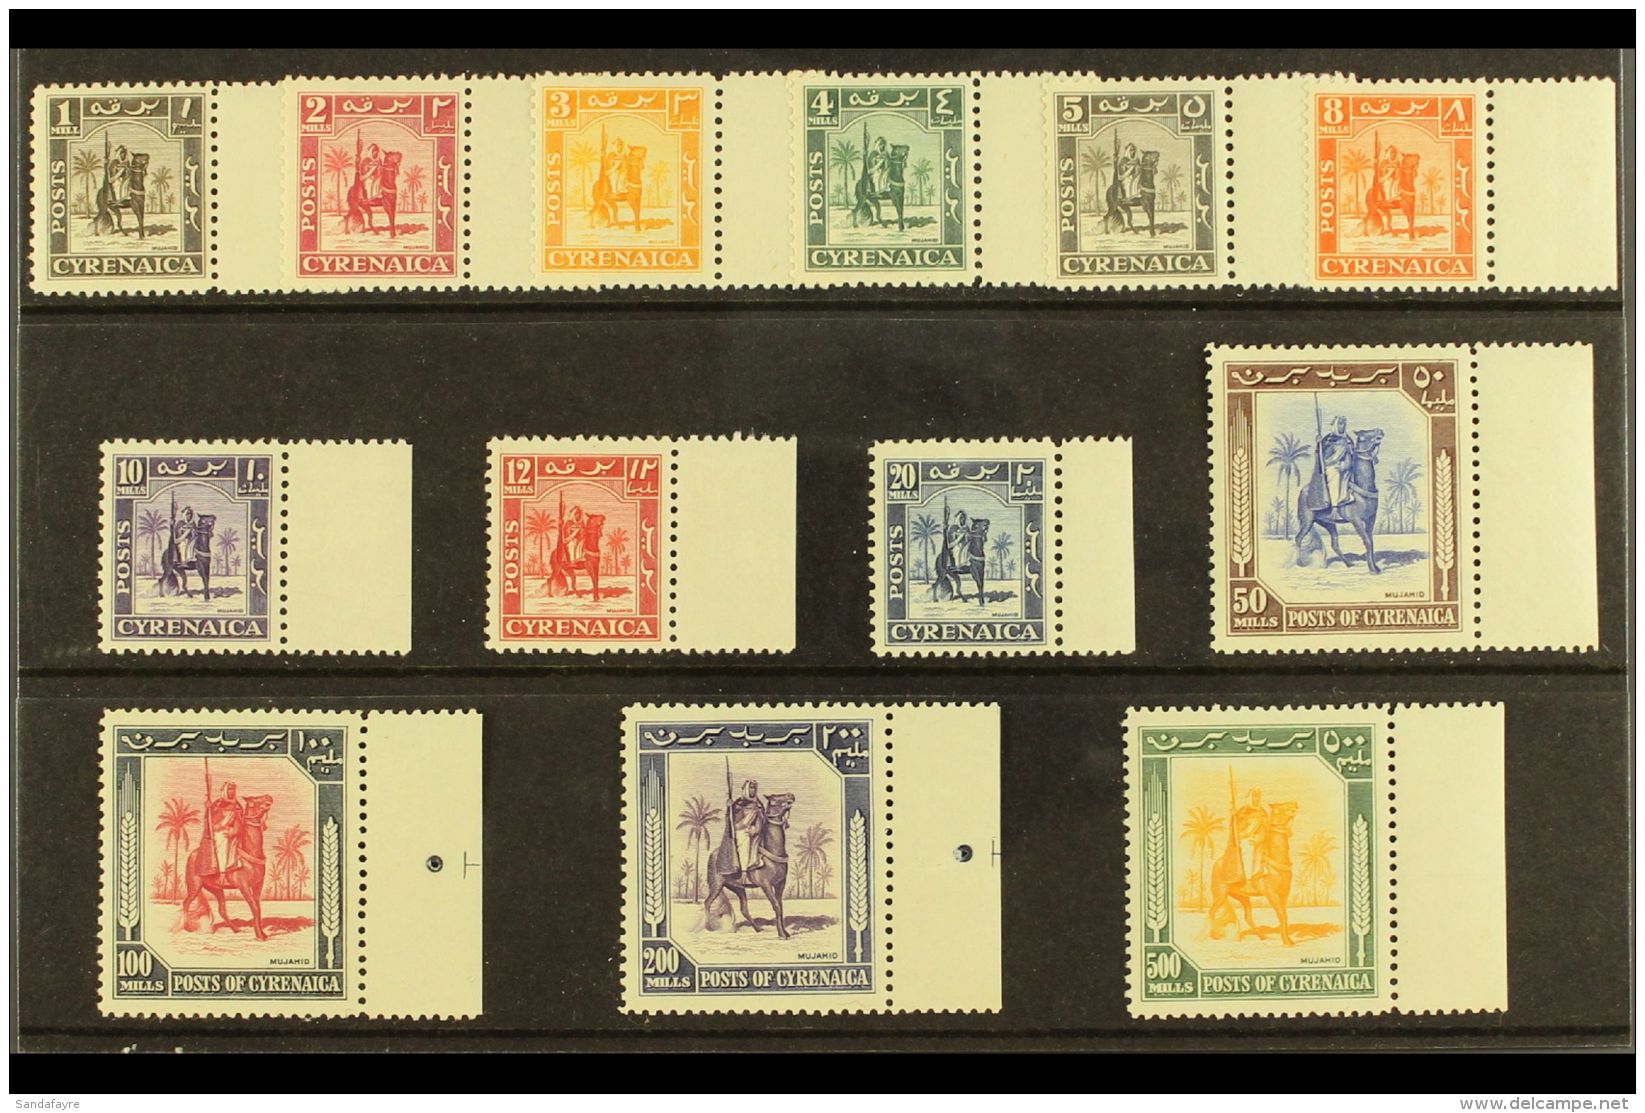 CYRENAICA  1950 "Mounted Warrior" Definitives Complete Set, SG 136/48, Very Fine Never Hinged Mint Matching... - Africa Oriental Italiana